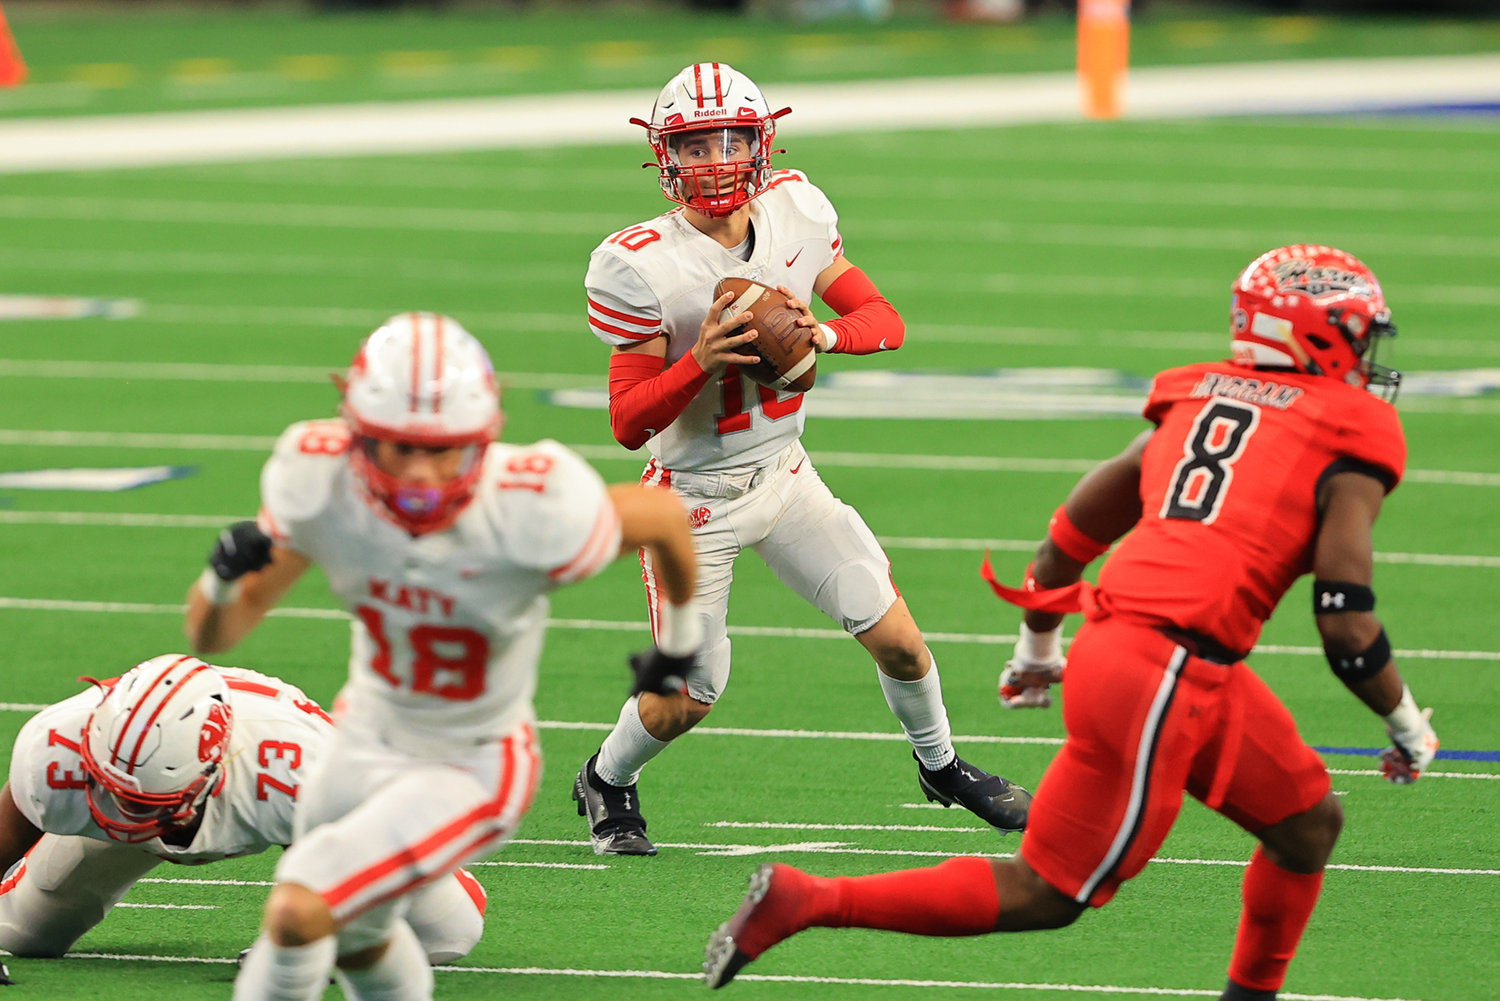 Katy High sophomore quarterback Caleb Koger (10) looks downfield during the Tigers’ 51-14 Class 6A-Division II state championship win over Cedar Hill on Saturday, Jan. 16, at AT&T Stadium in Arlington.